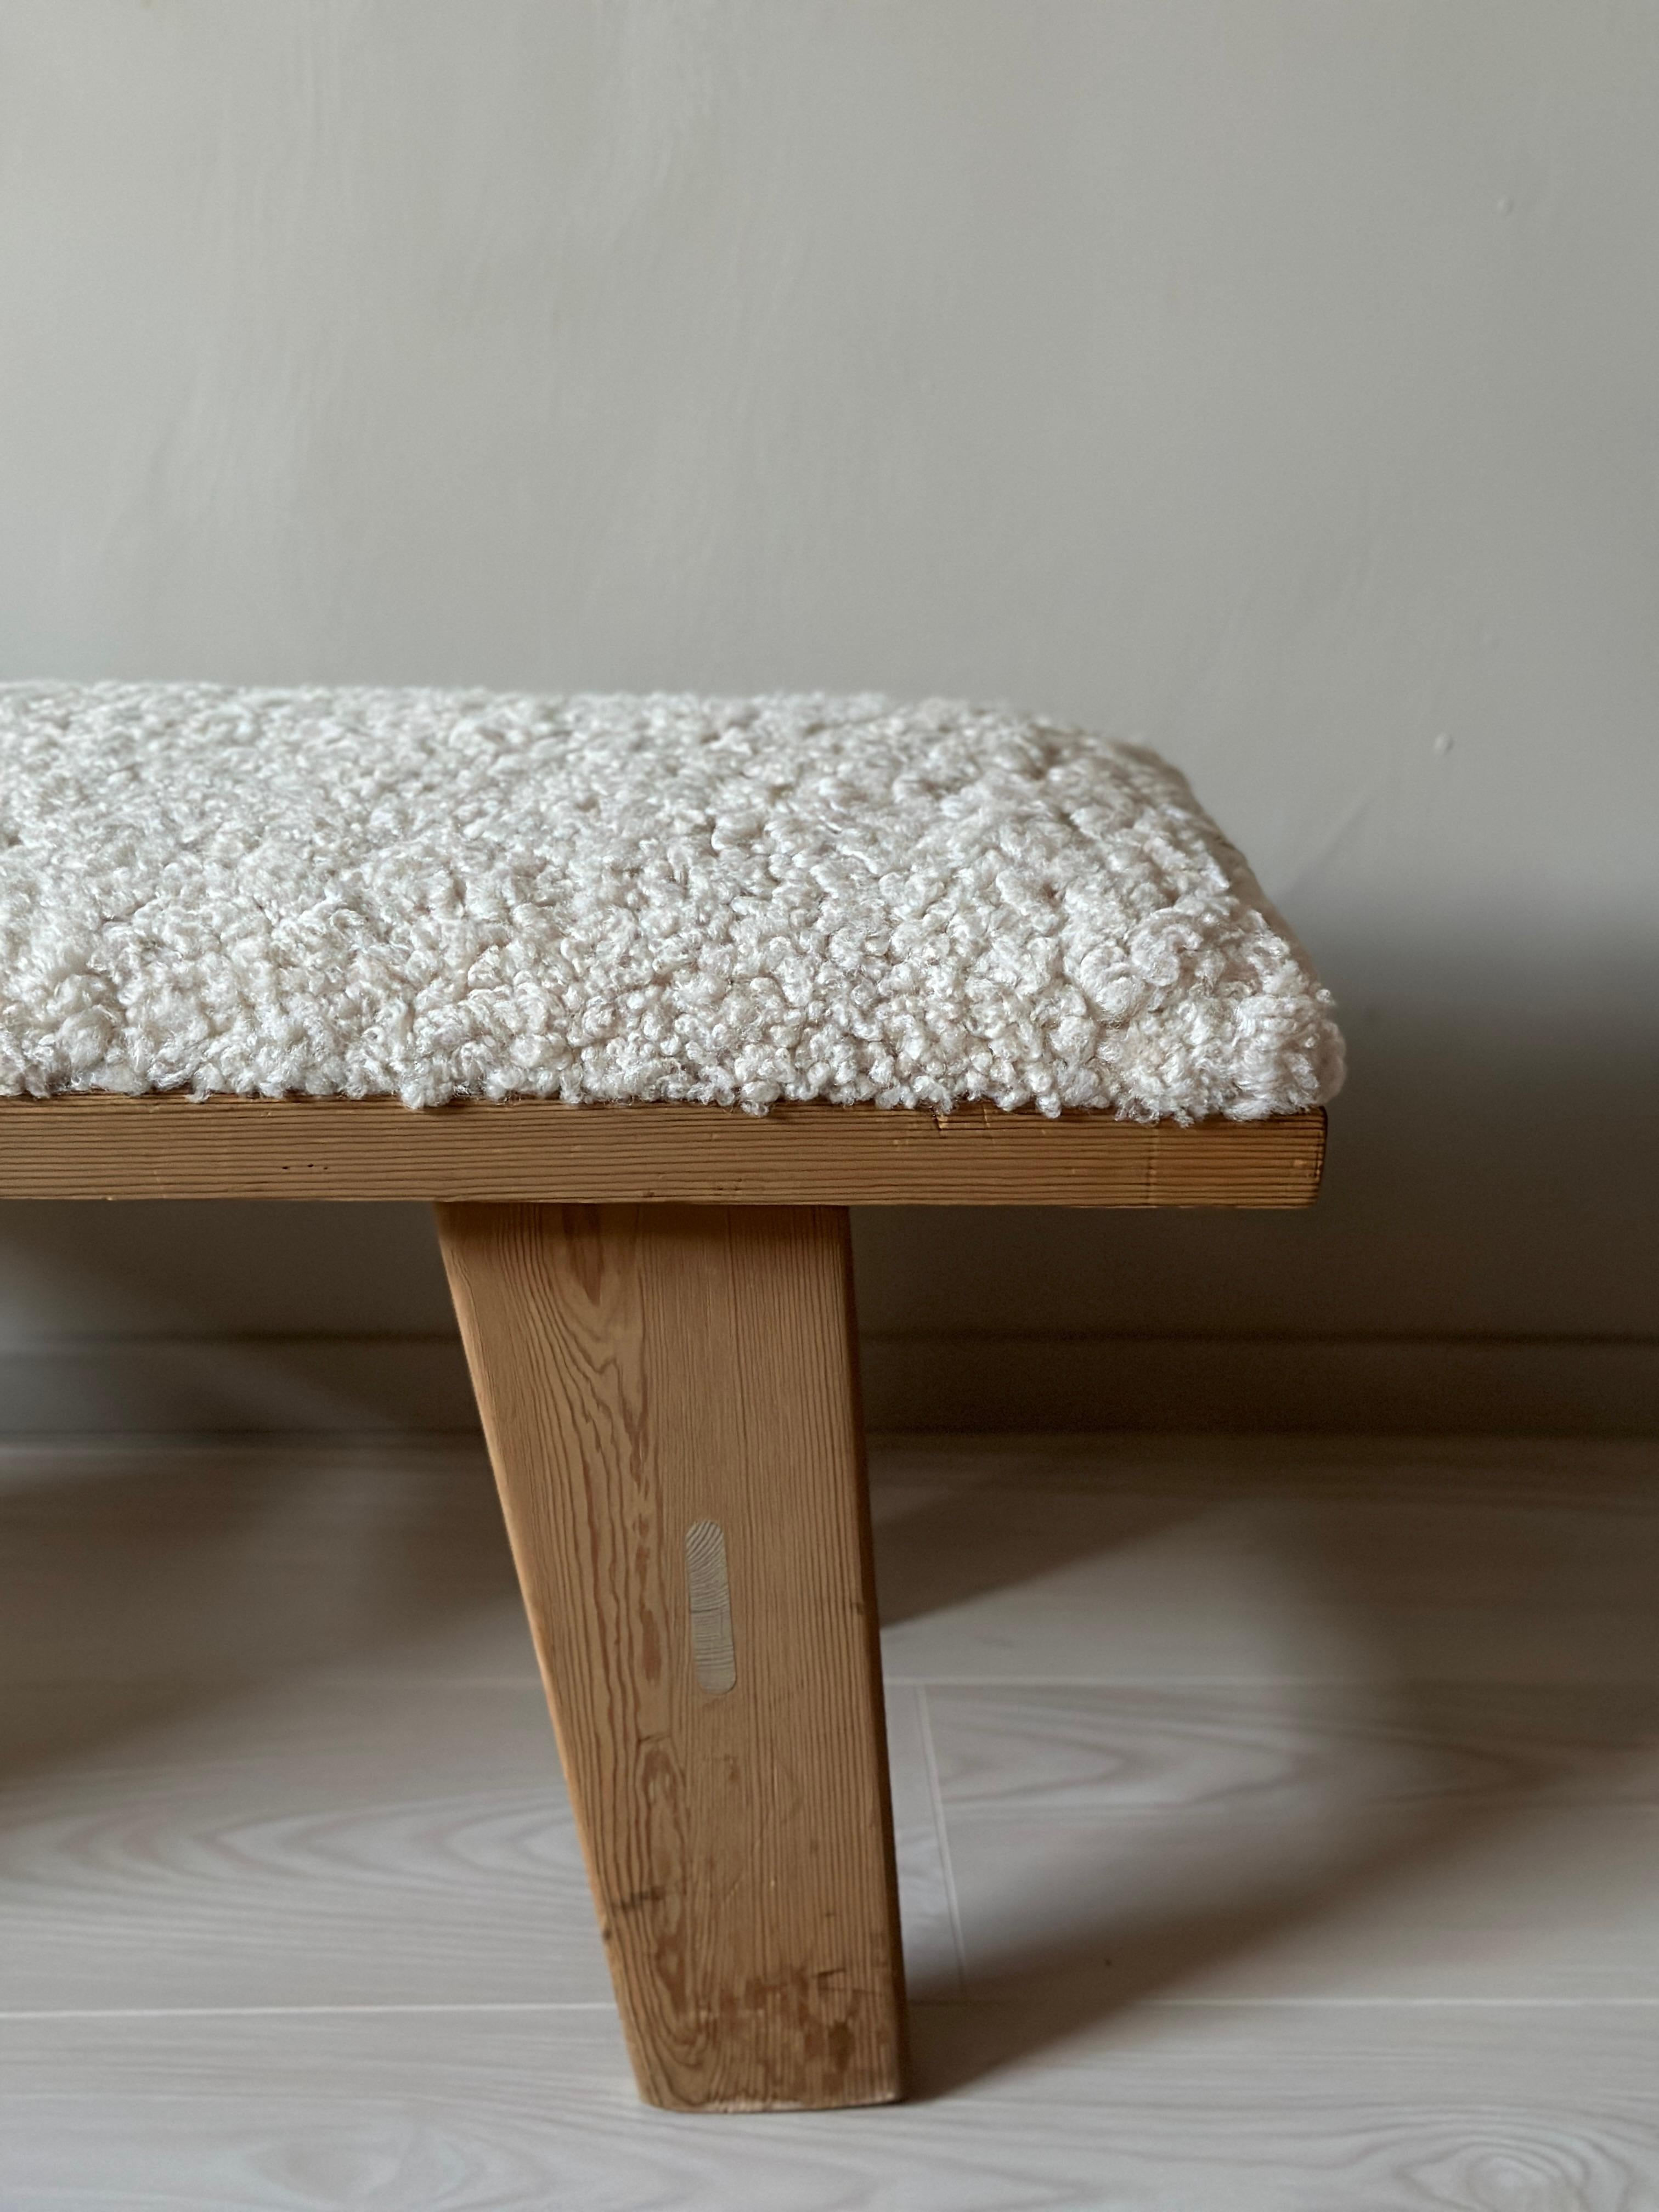 A Vintage Bench by Krogenæs Møbler in Pine, reupholsterd in Shearling. Produced in Norway in the 1960s. 

